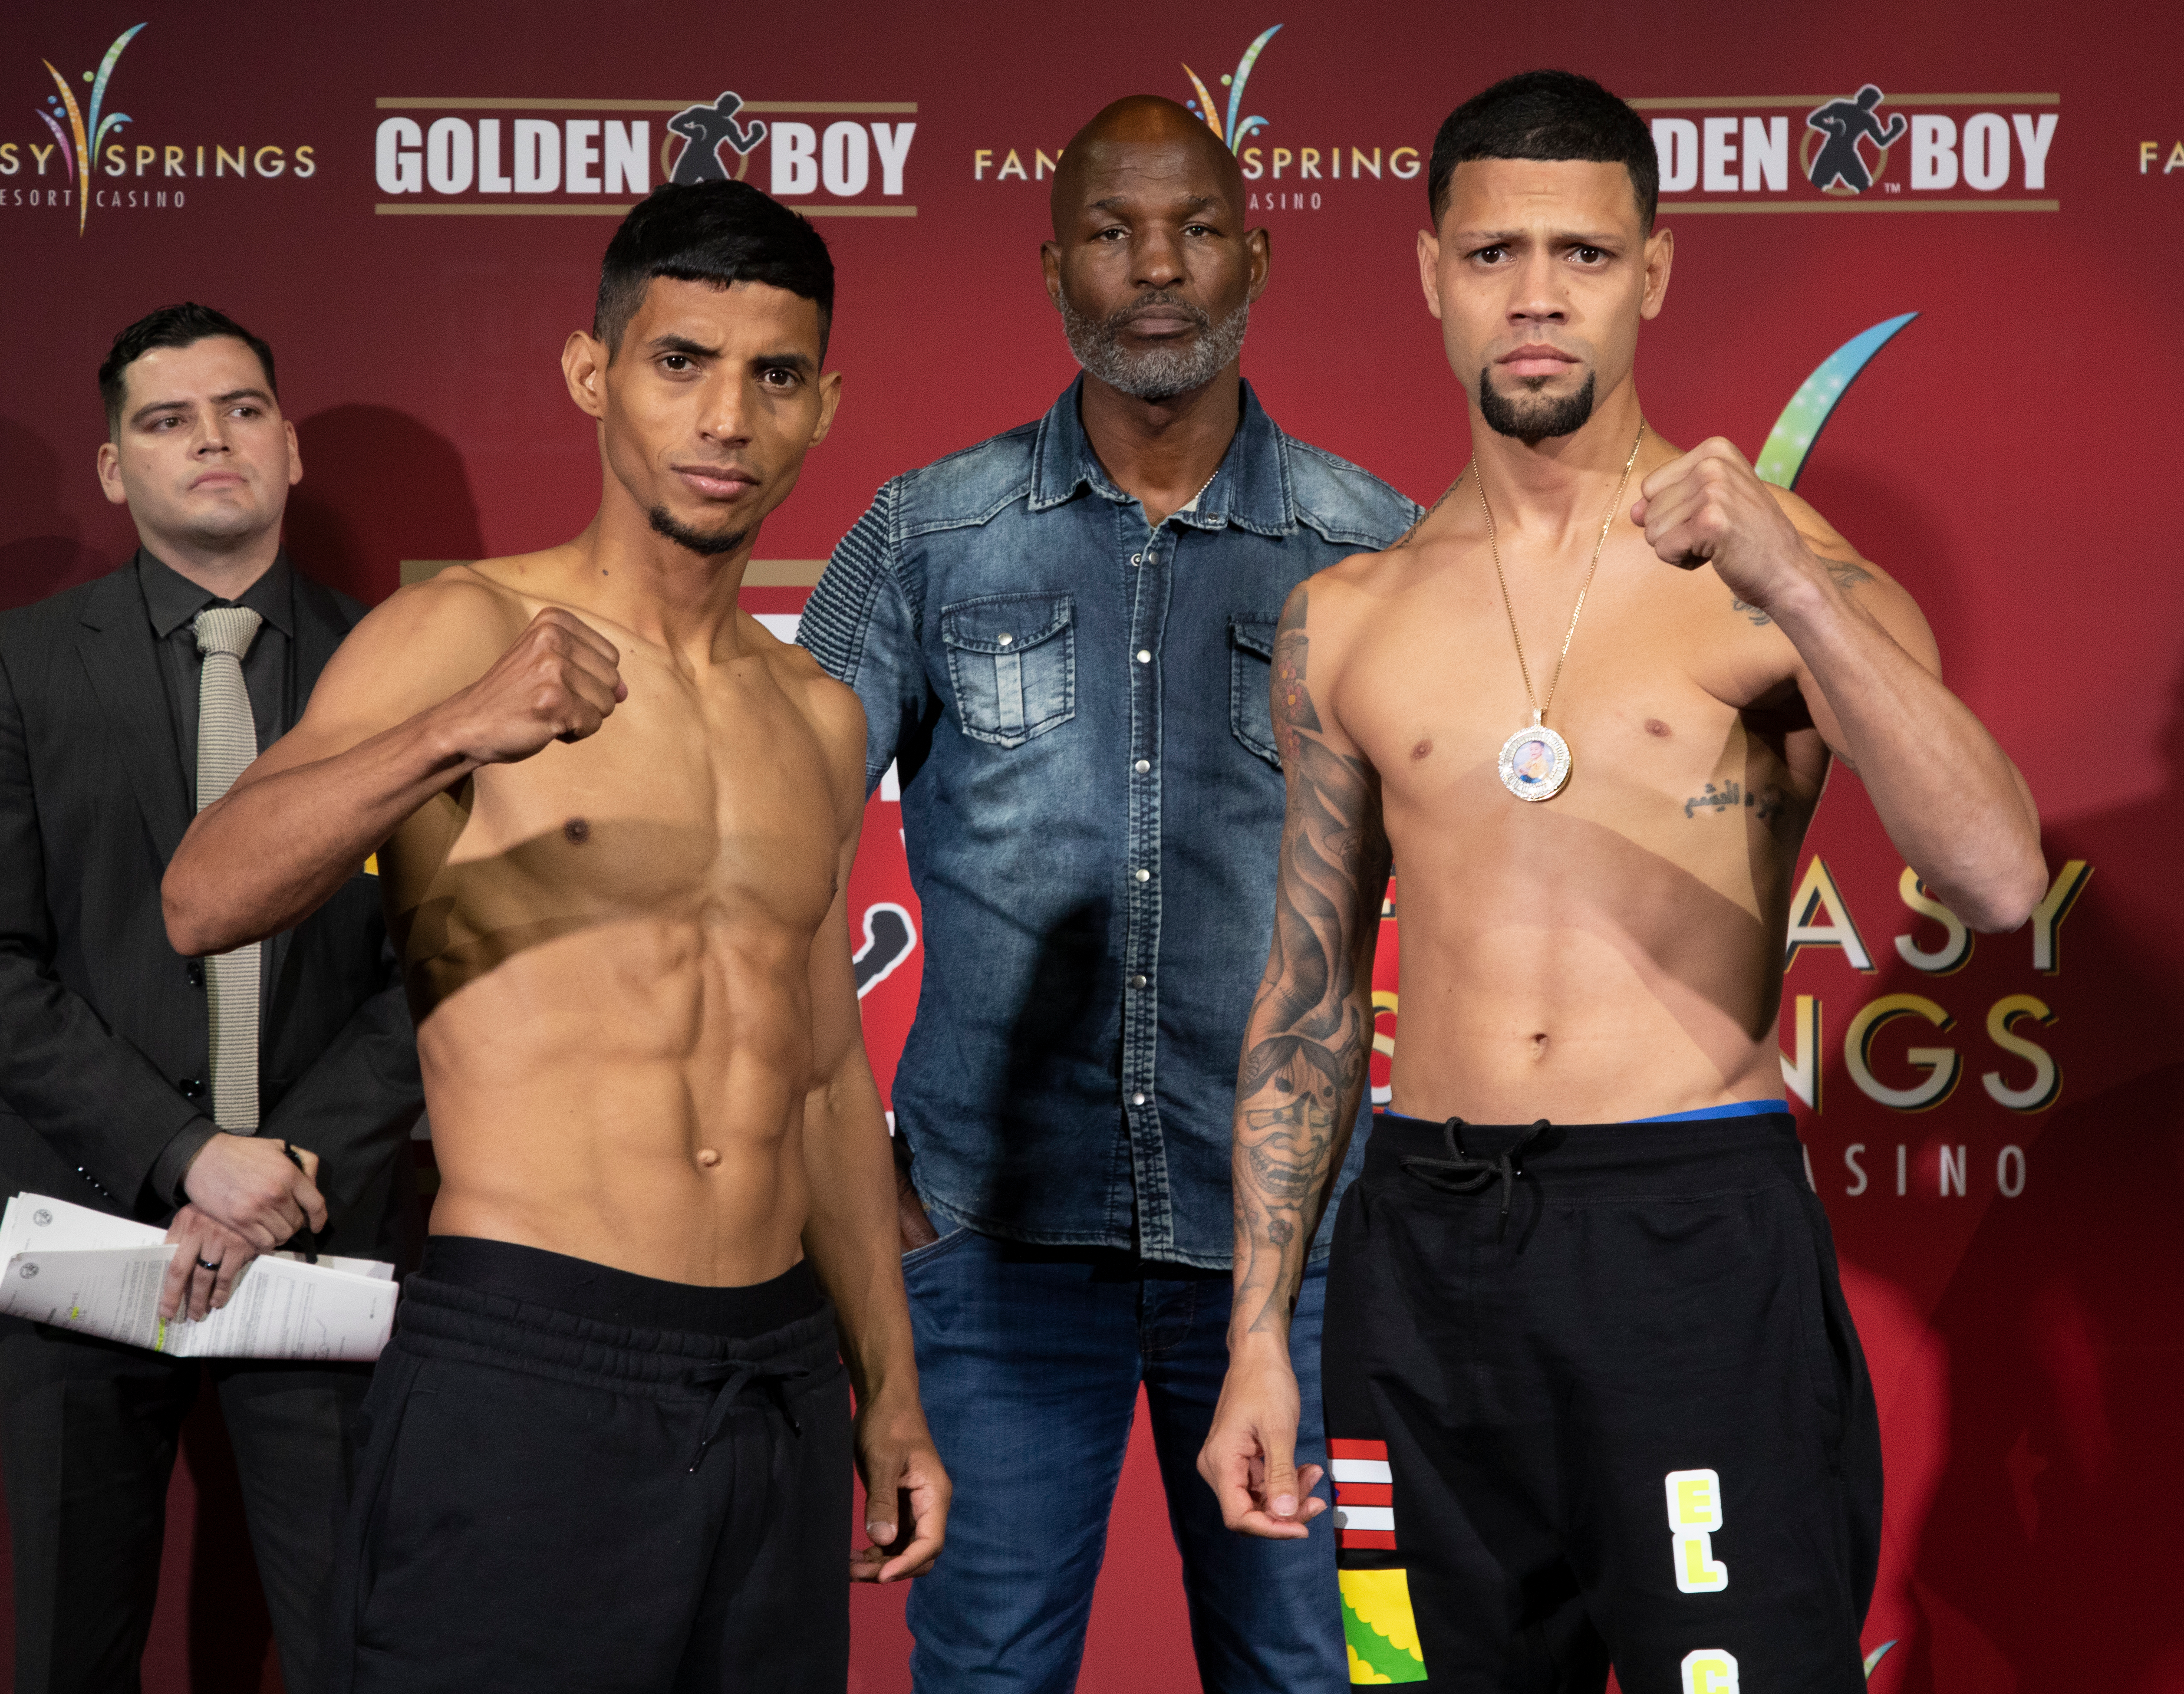 Angel Acosta takes on Janiel Rivera in the main event of tonight’s Golden Boy card